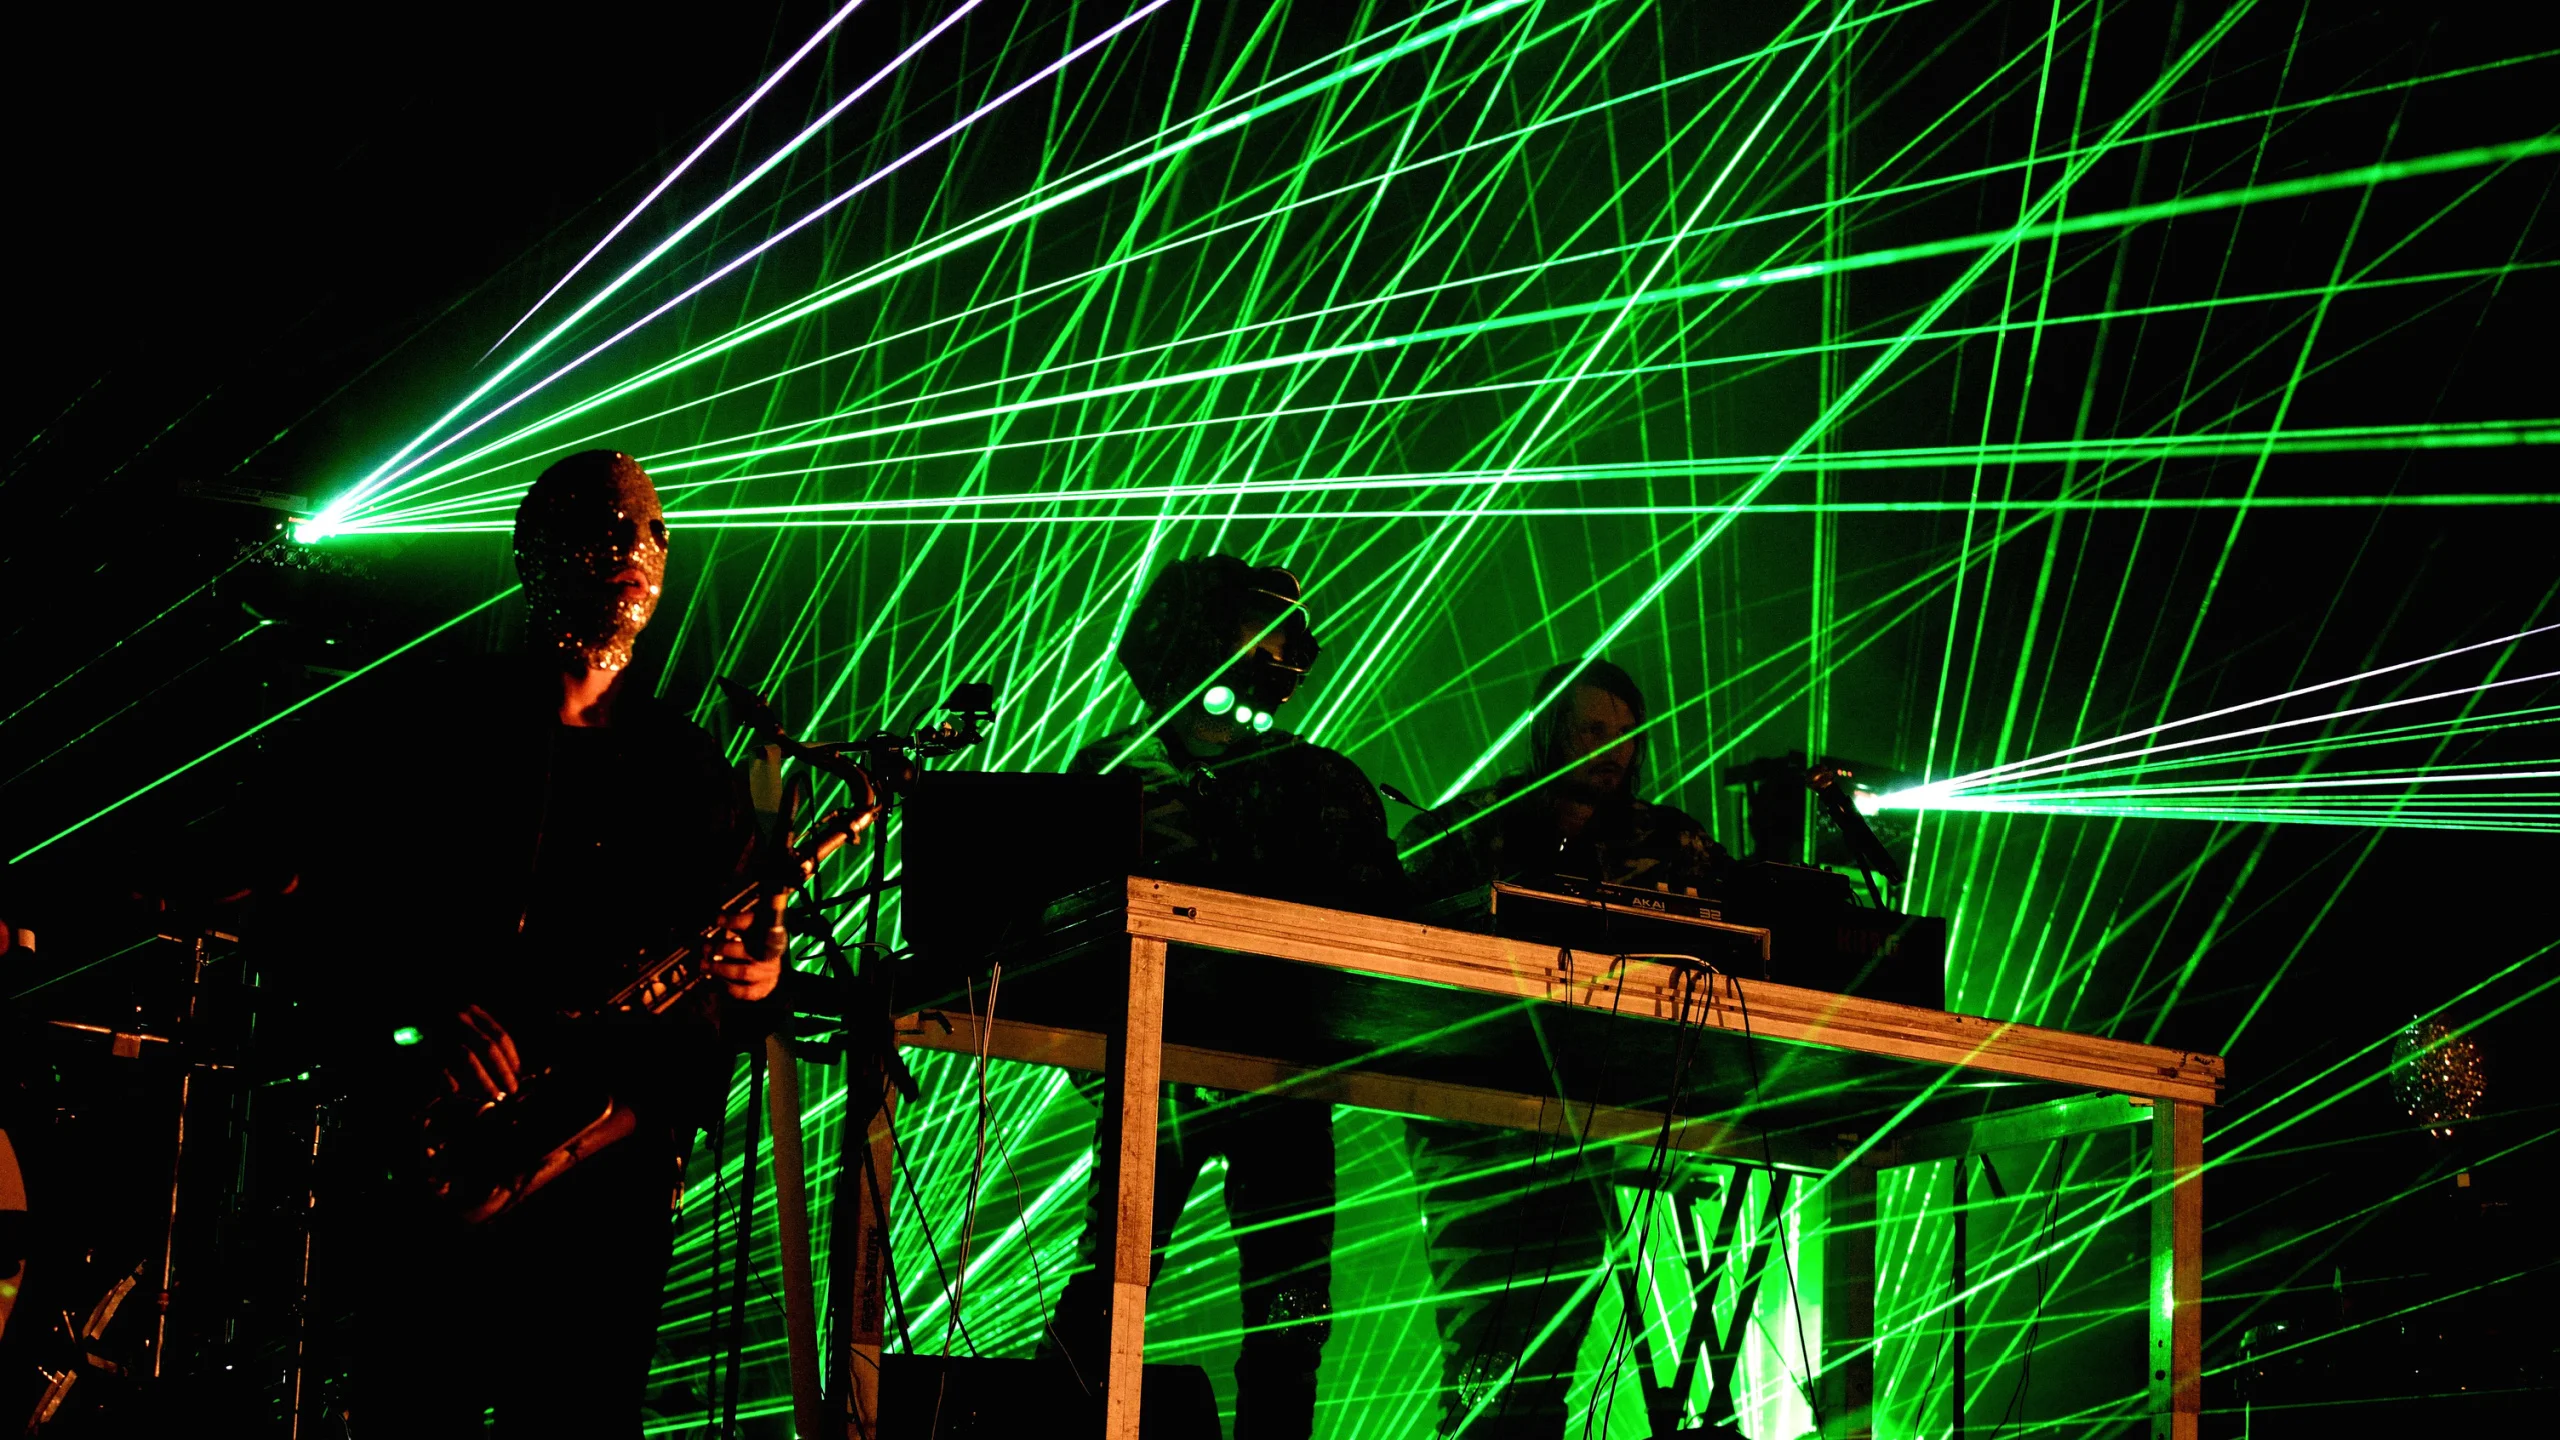 Röyksopp performing live with Robyn at Sonar festival in 2014. Photo: Christian Bertrand / Shutterstock.com.